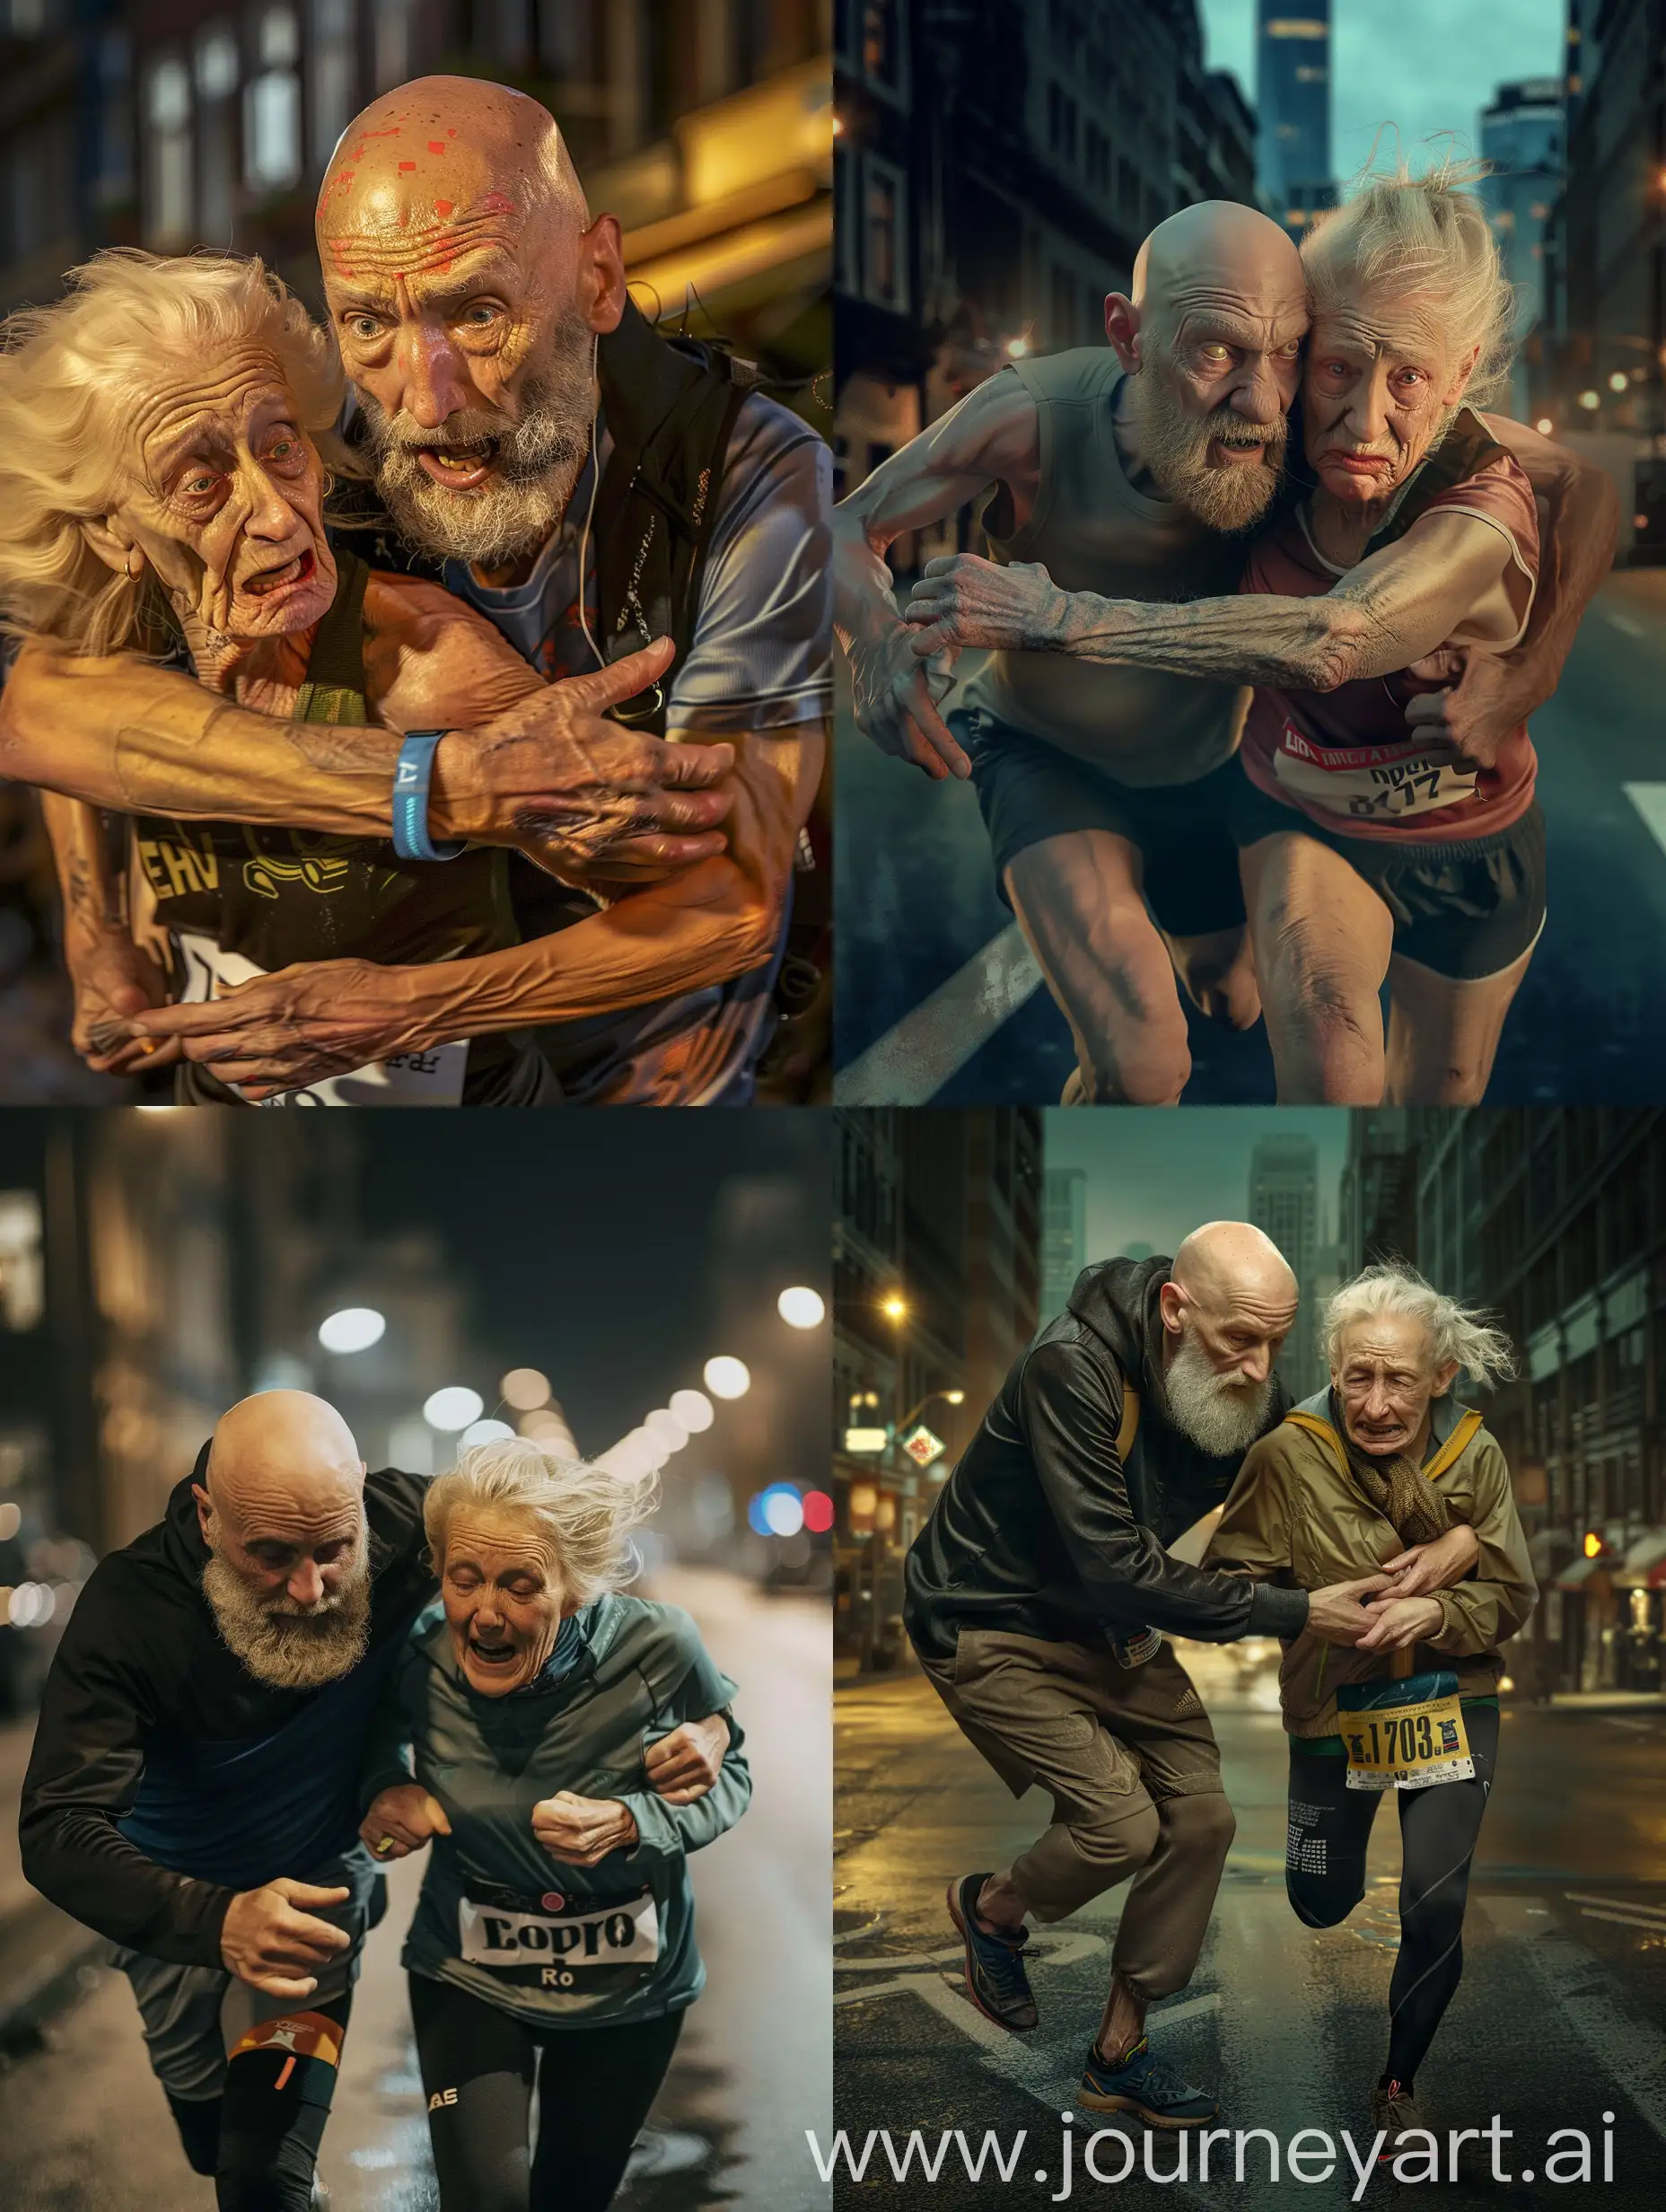 A bald old man with a beard, helping an old blonde woman, both in street running clothes, who is feeling pain in a street race, night weather, city, realistic